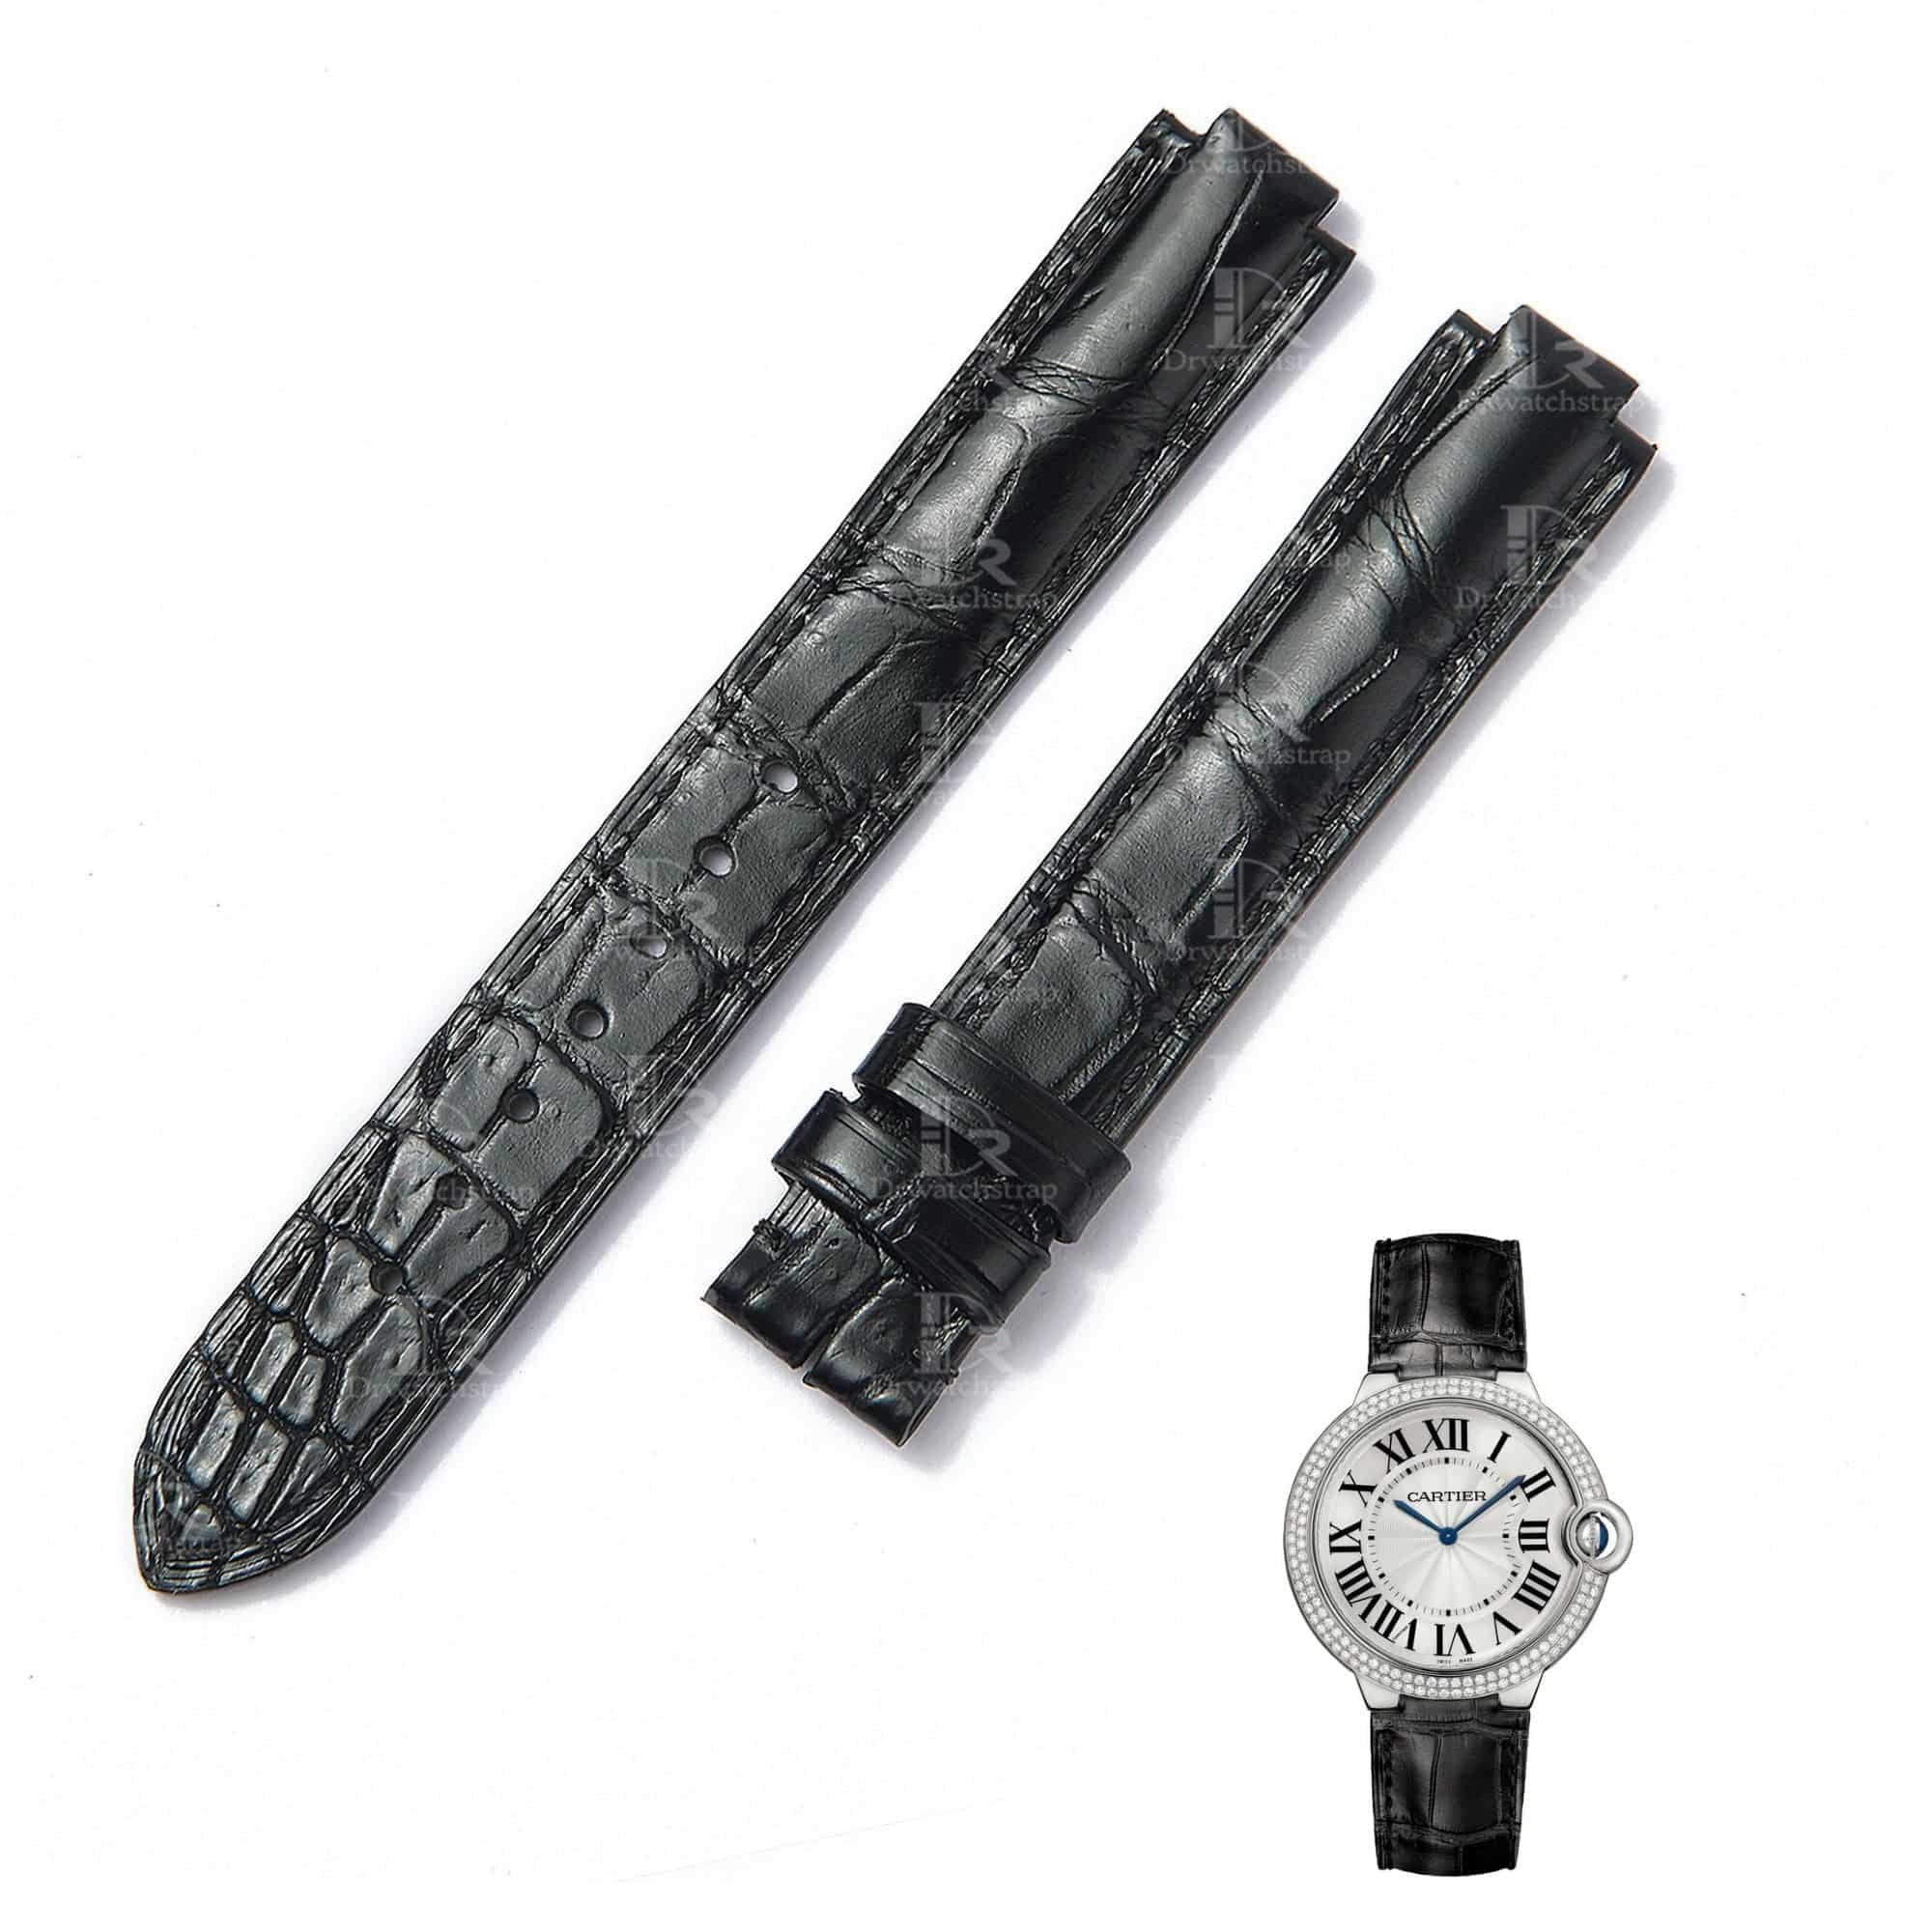 Genuine best quality OEM custom American Alligator black Belly-scale replacement Cartier Ballon Bleu de watch leather strap & watch band from dr watchstrap for Cartier de Ballon Bleu watches online - Shop the high-end watch straps & watchbands at a low price